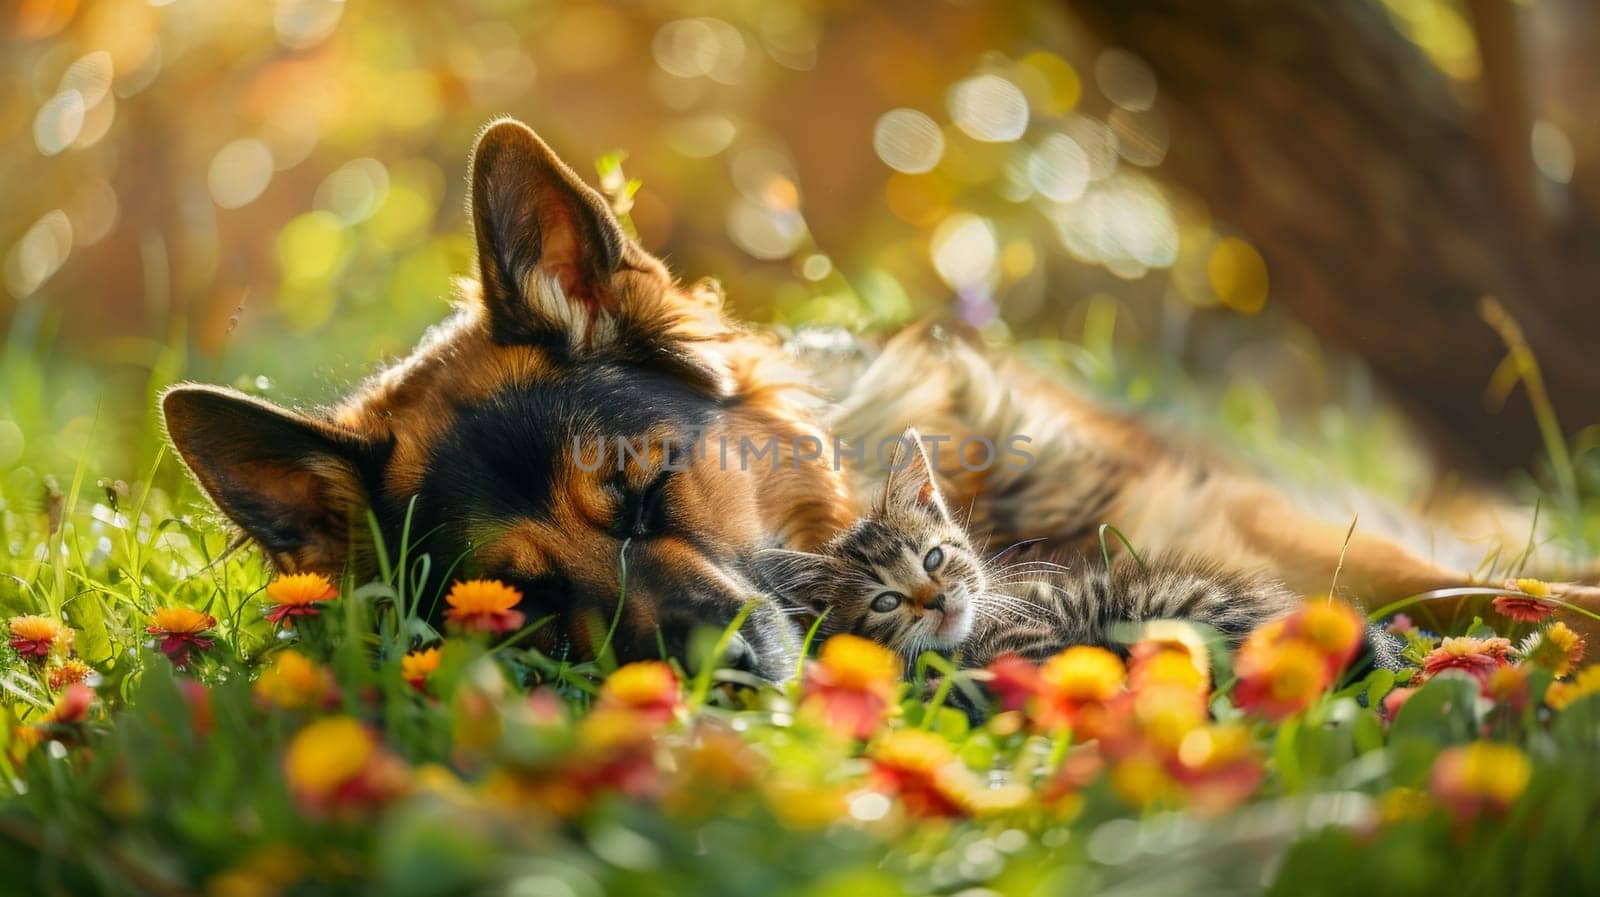 dog and kitten lying closely together in the grass and flower under the tree with sunlit on summer.